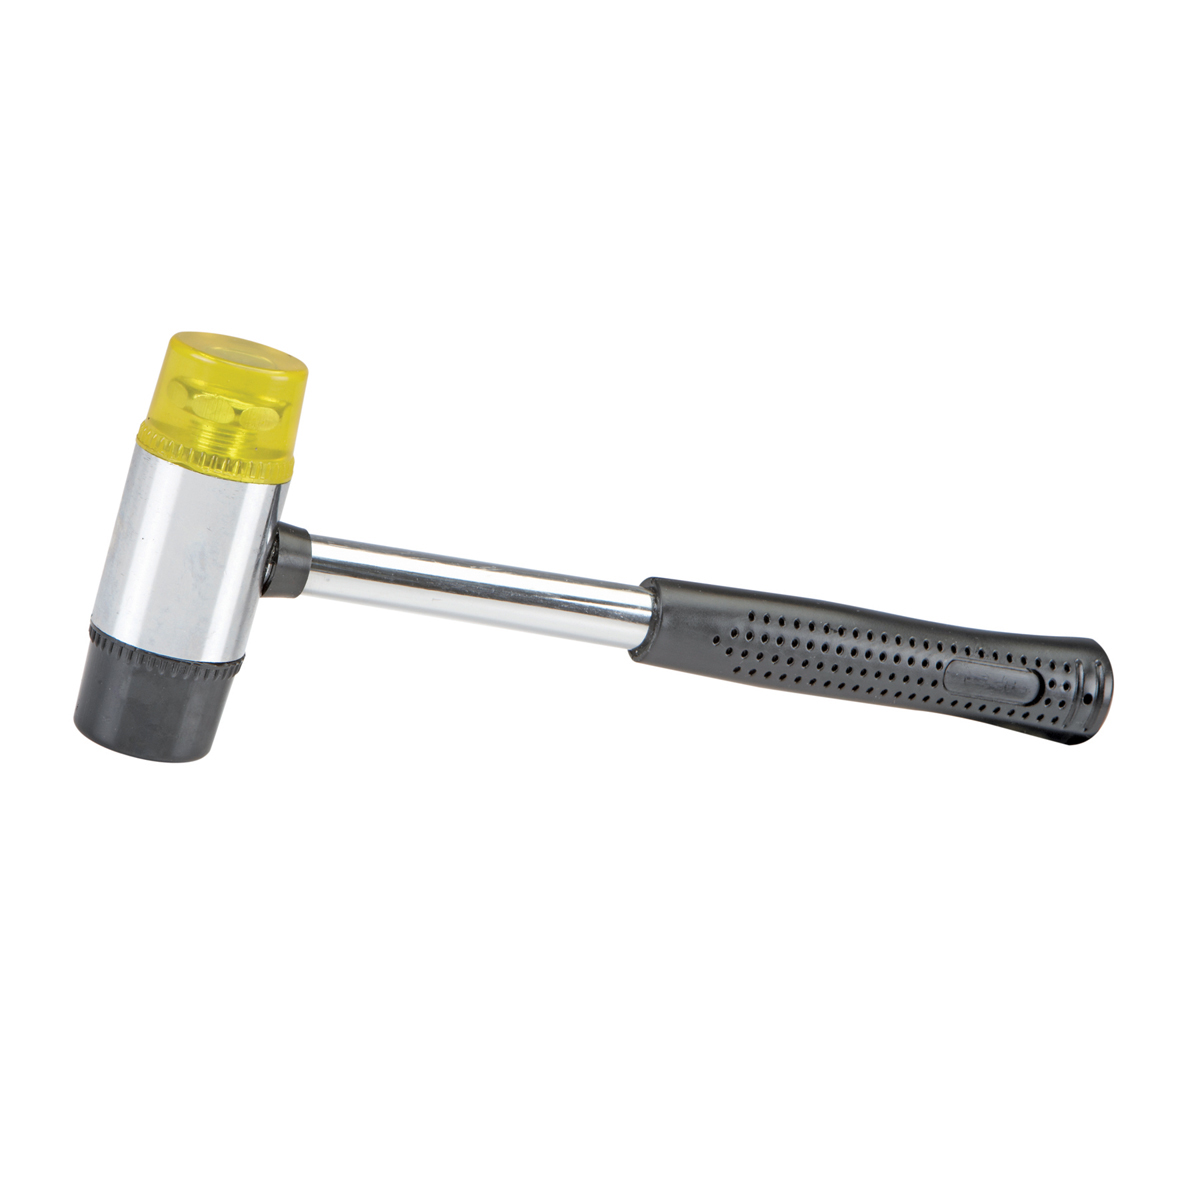 PITTSBURGH 1-1/2 lb. Soft Face Mallet - Item 69048 / 39528